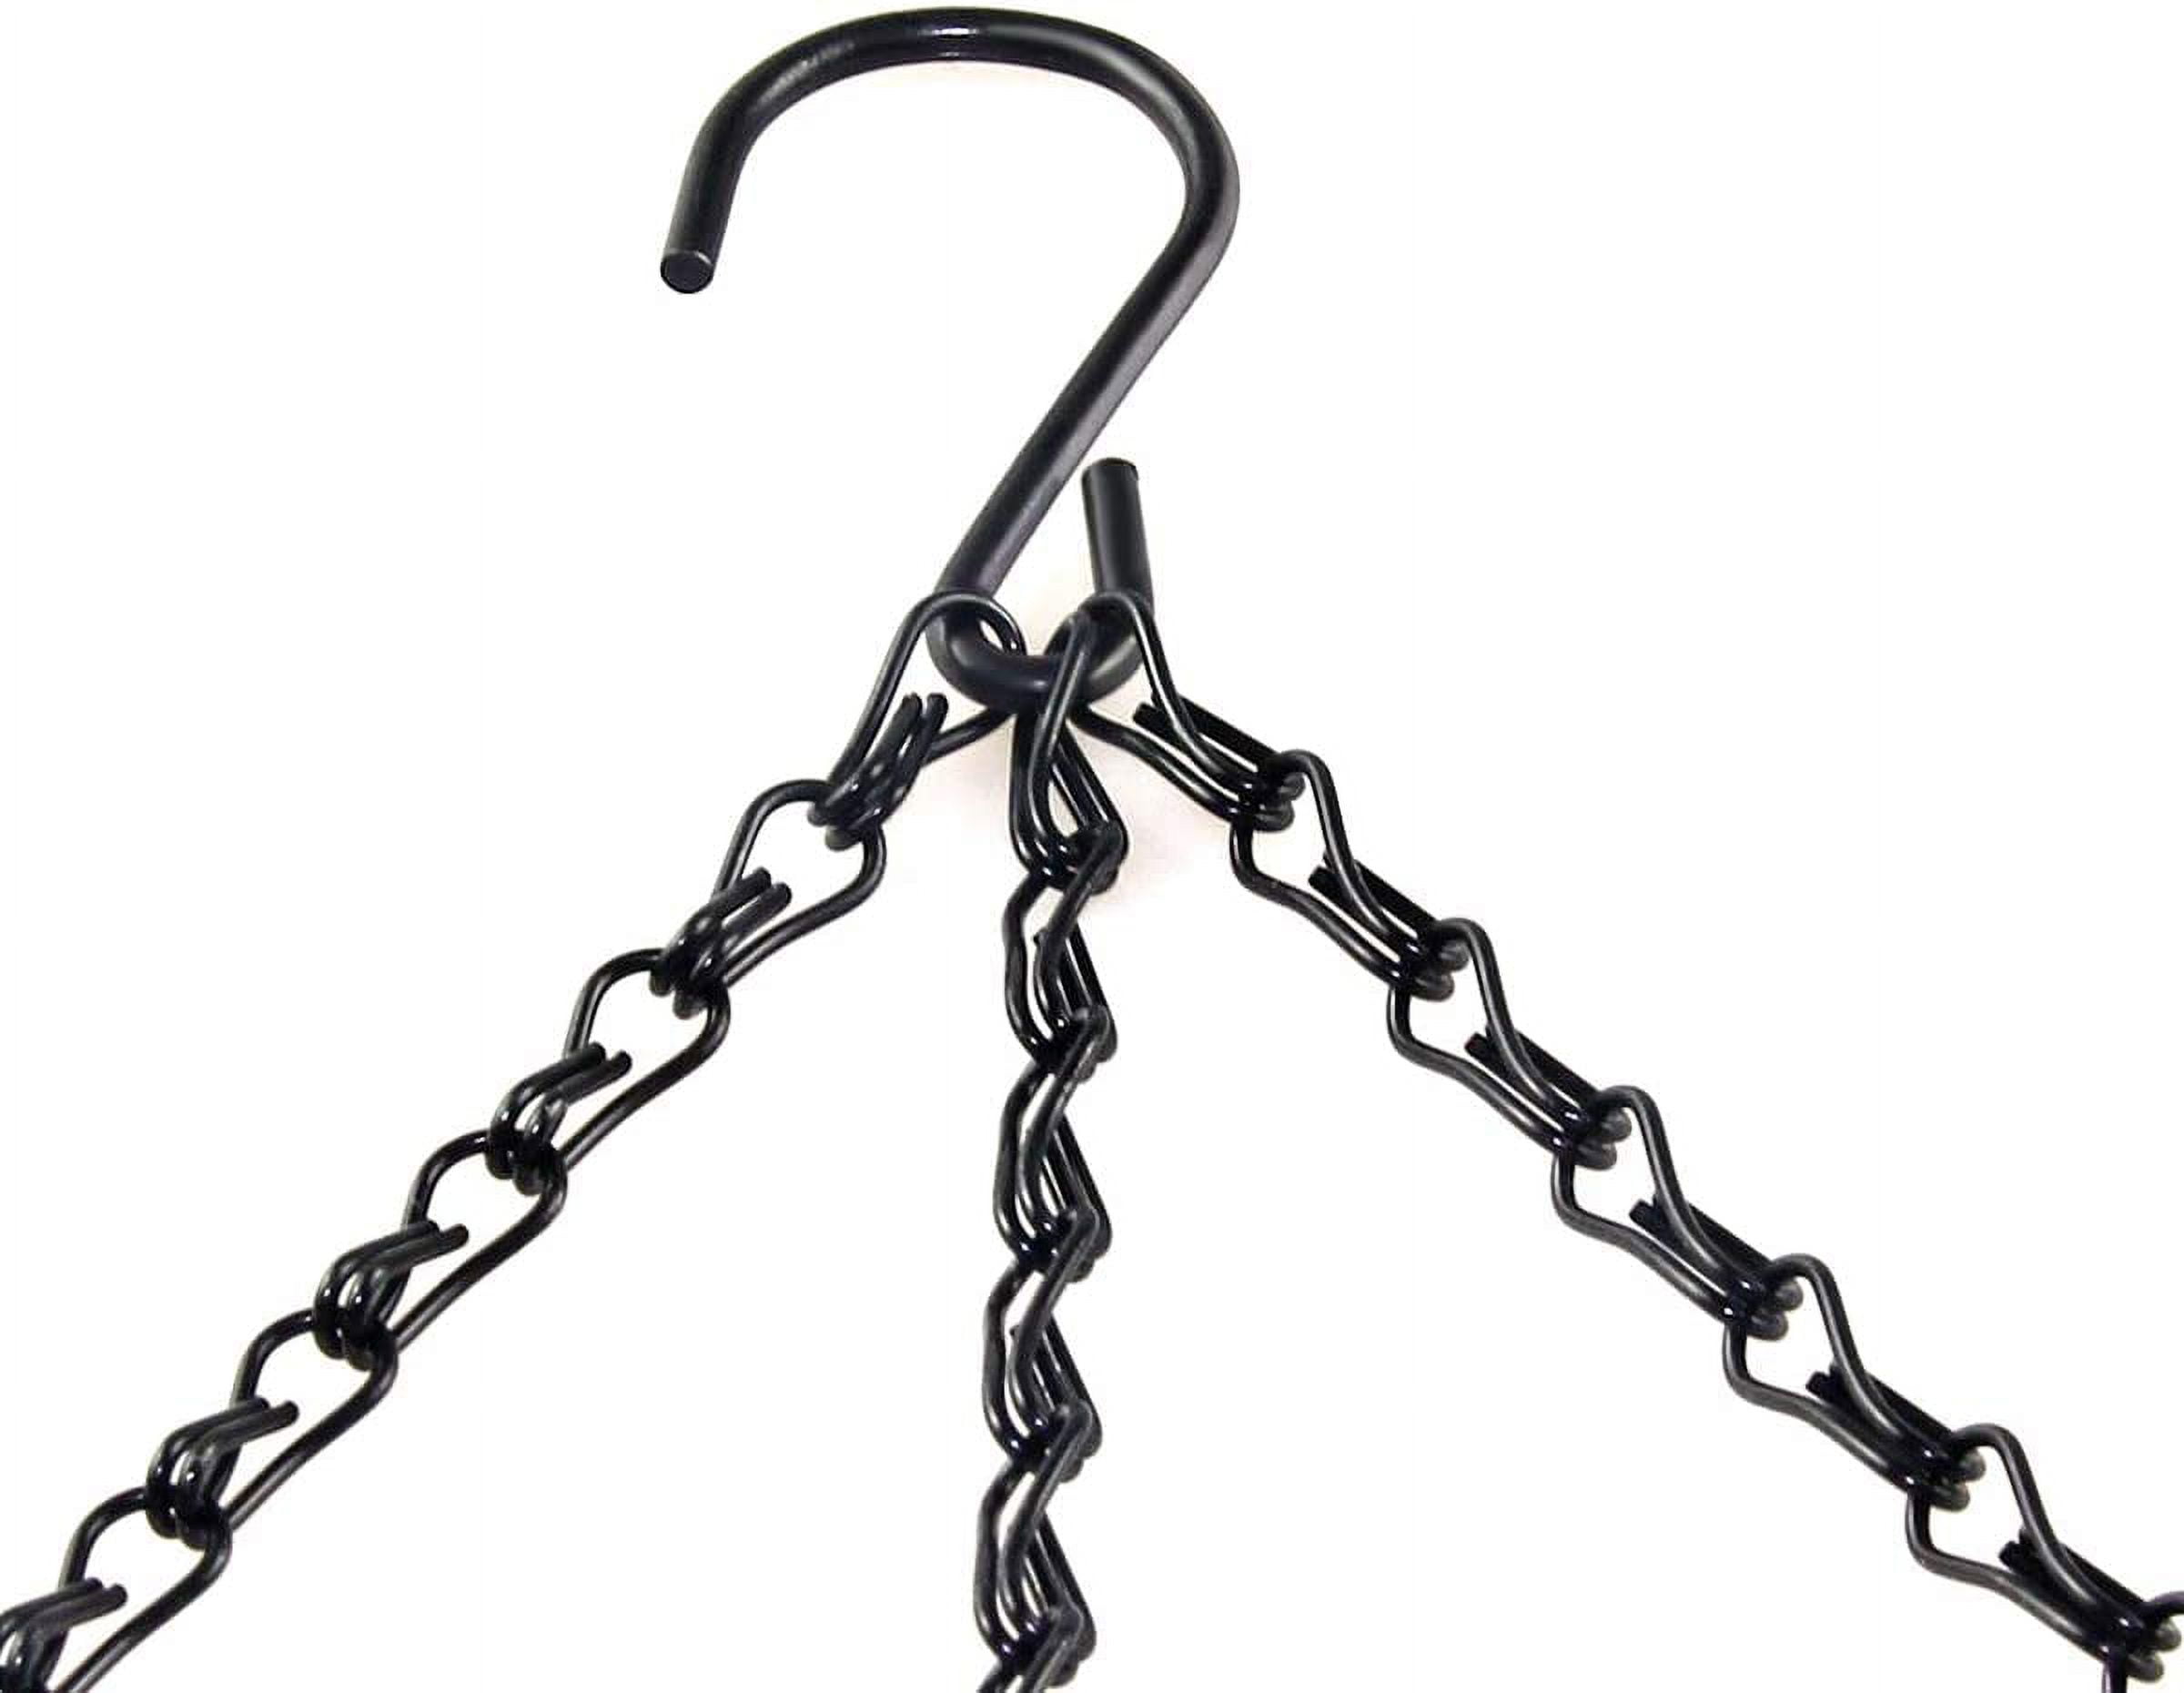 Hanging Basket Extender Chain, Black, 36-In. - Danbury, CT - New Milford,  CT - Agriventures Agway Pickup & Delivery